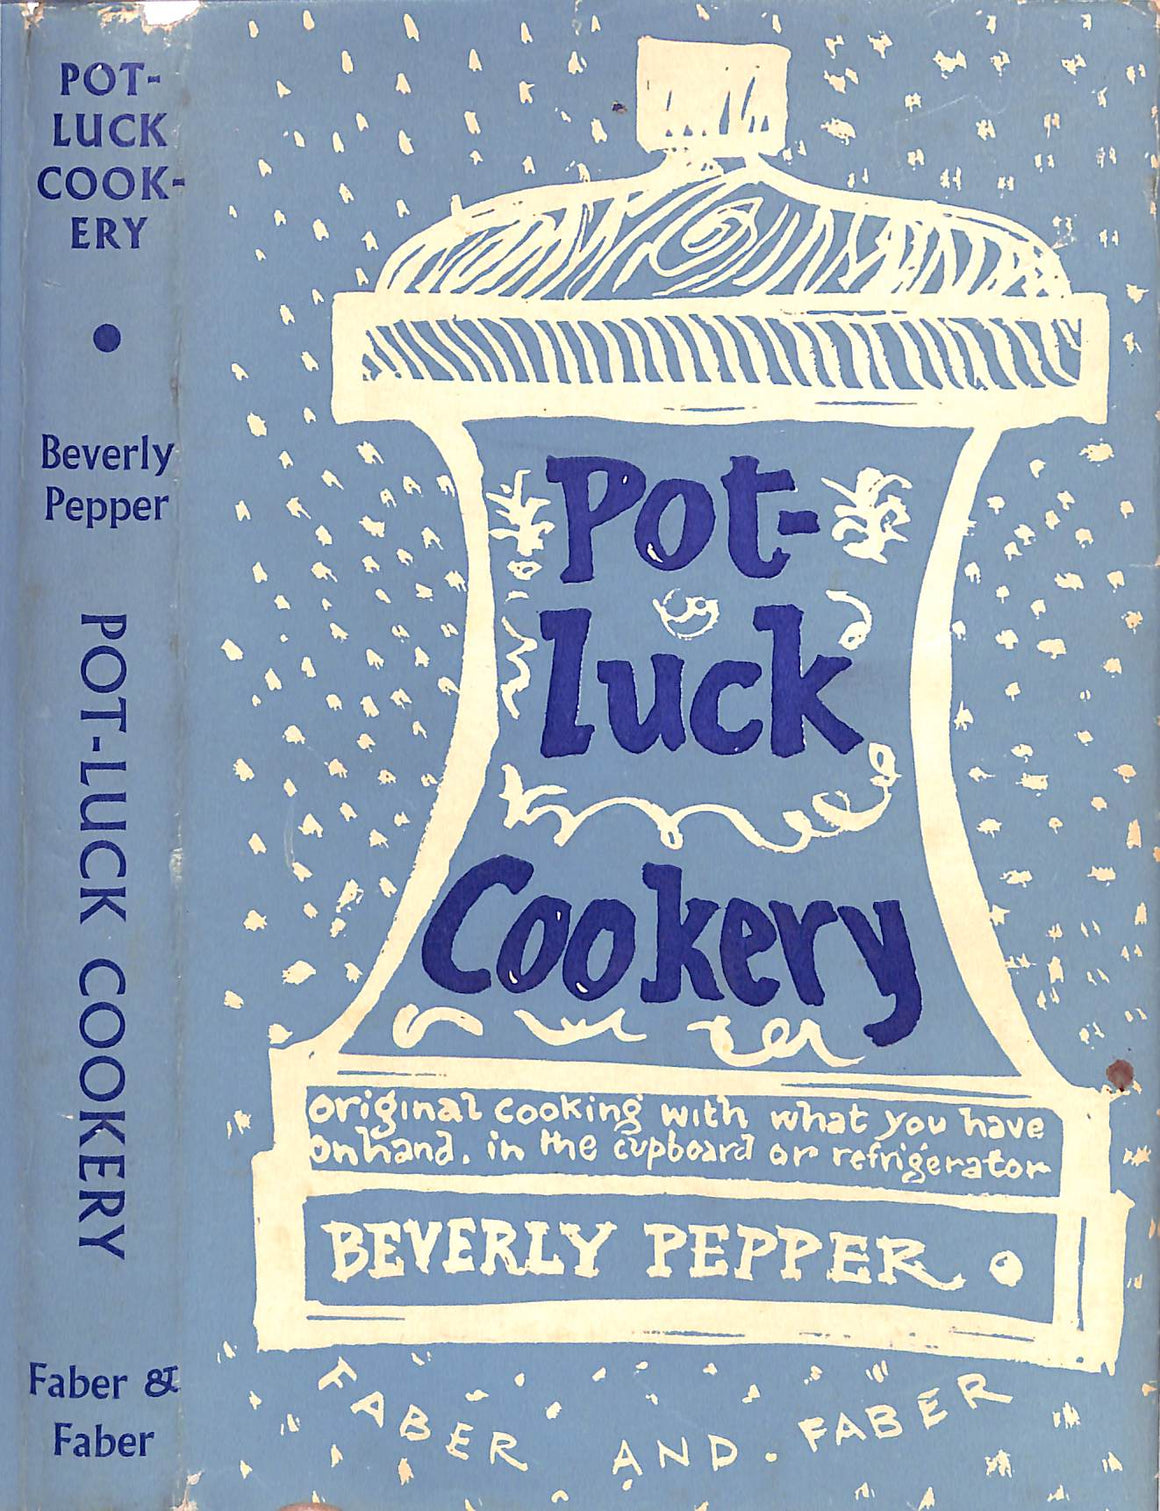 "Pot-Luck Cookery: Original Cooking With What You Have On Hand, In The Cupboard Or Refrigerator" 1957 PEPPER, Beverly